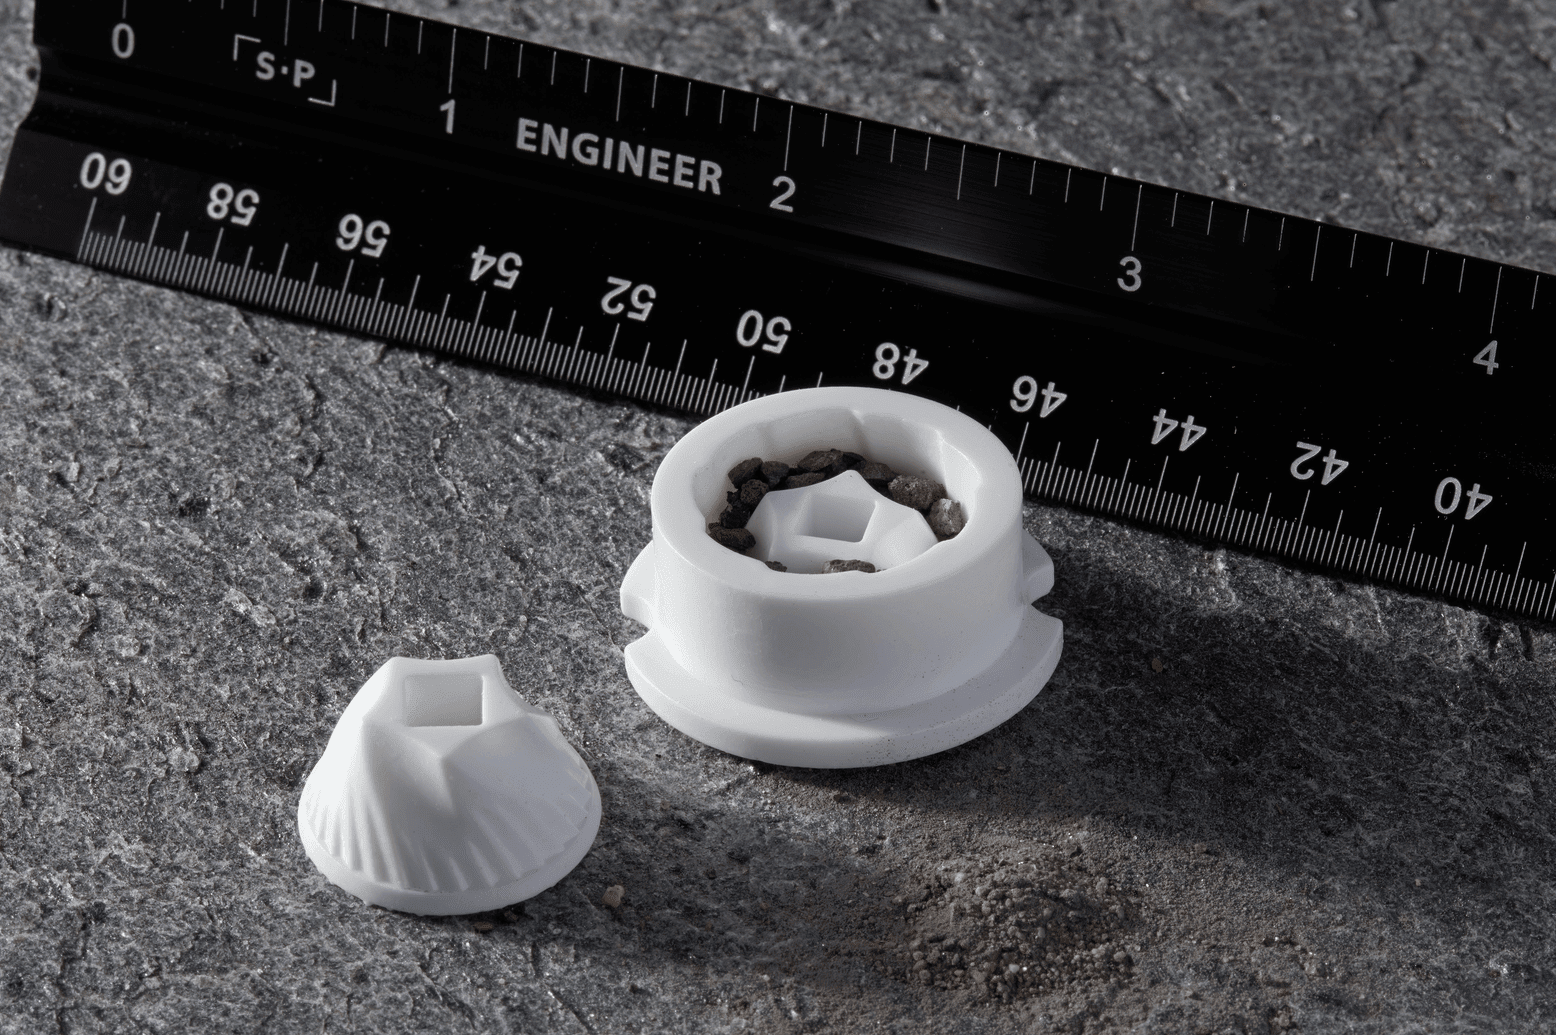 Image shows two 3D printed parts with Formlabs Alumina 4N ceramic resin